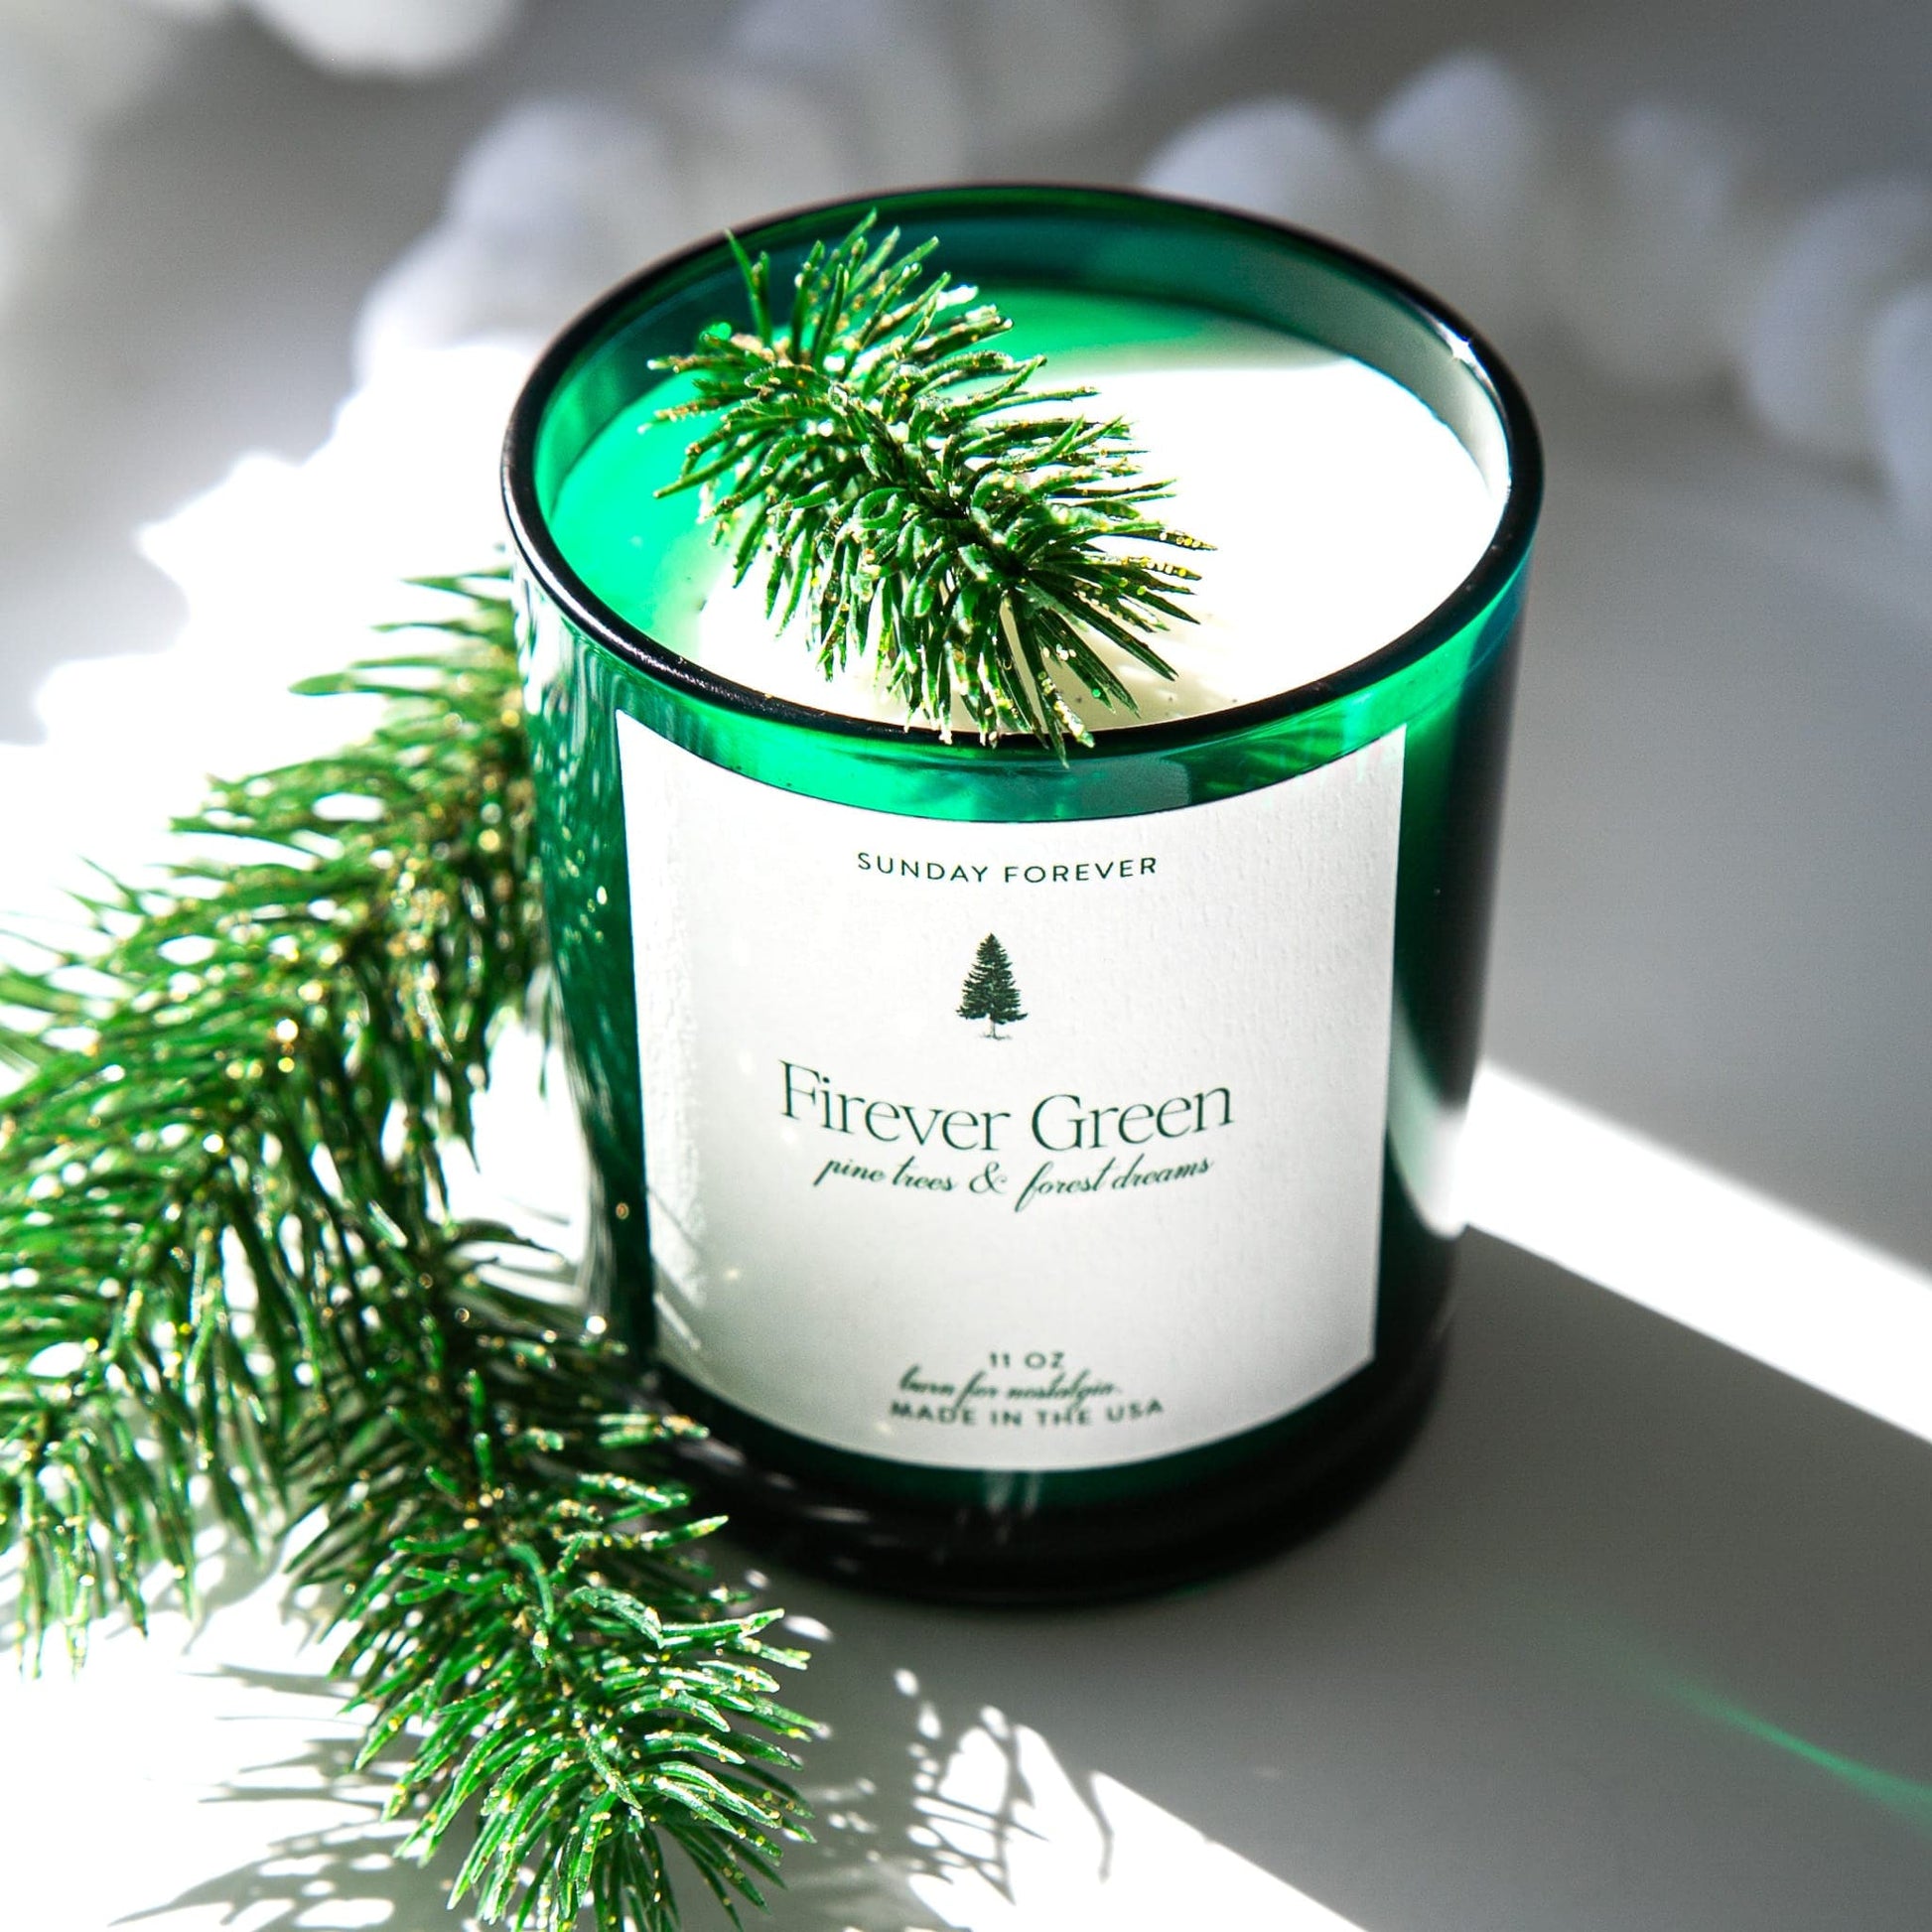 NEW! Limited Edition Firever Green Luxury Candle - Candle-Sunday Forever